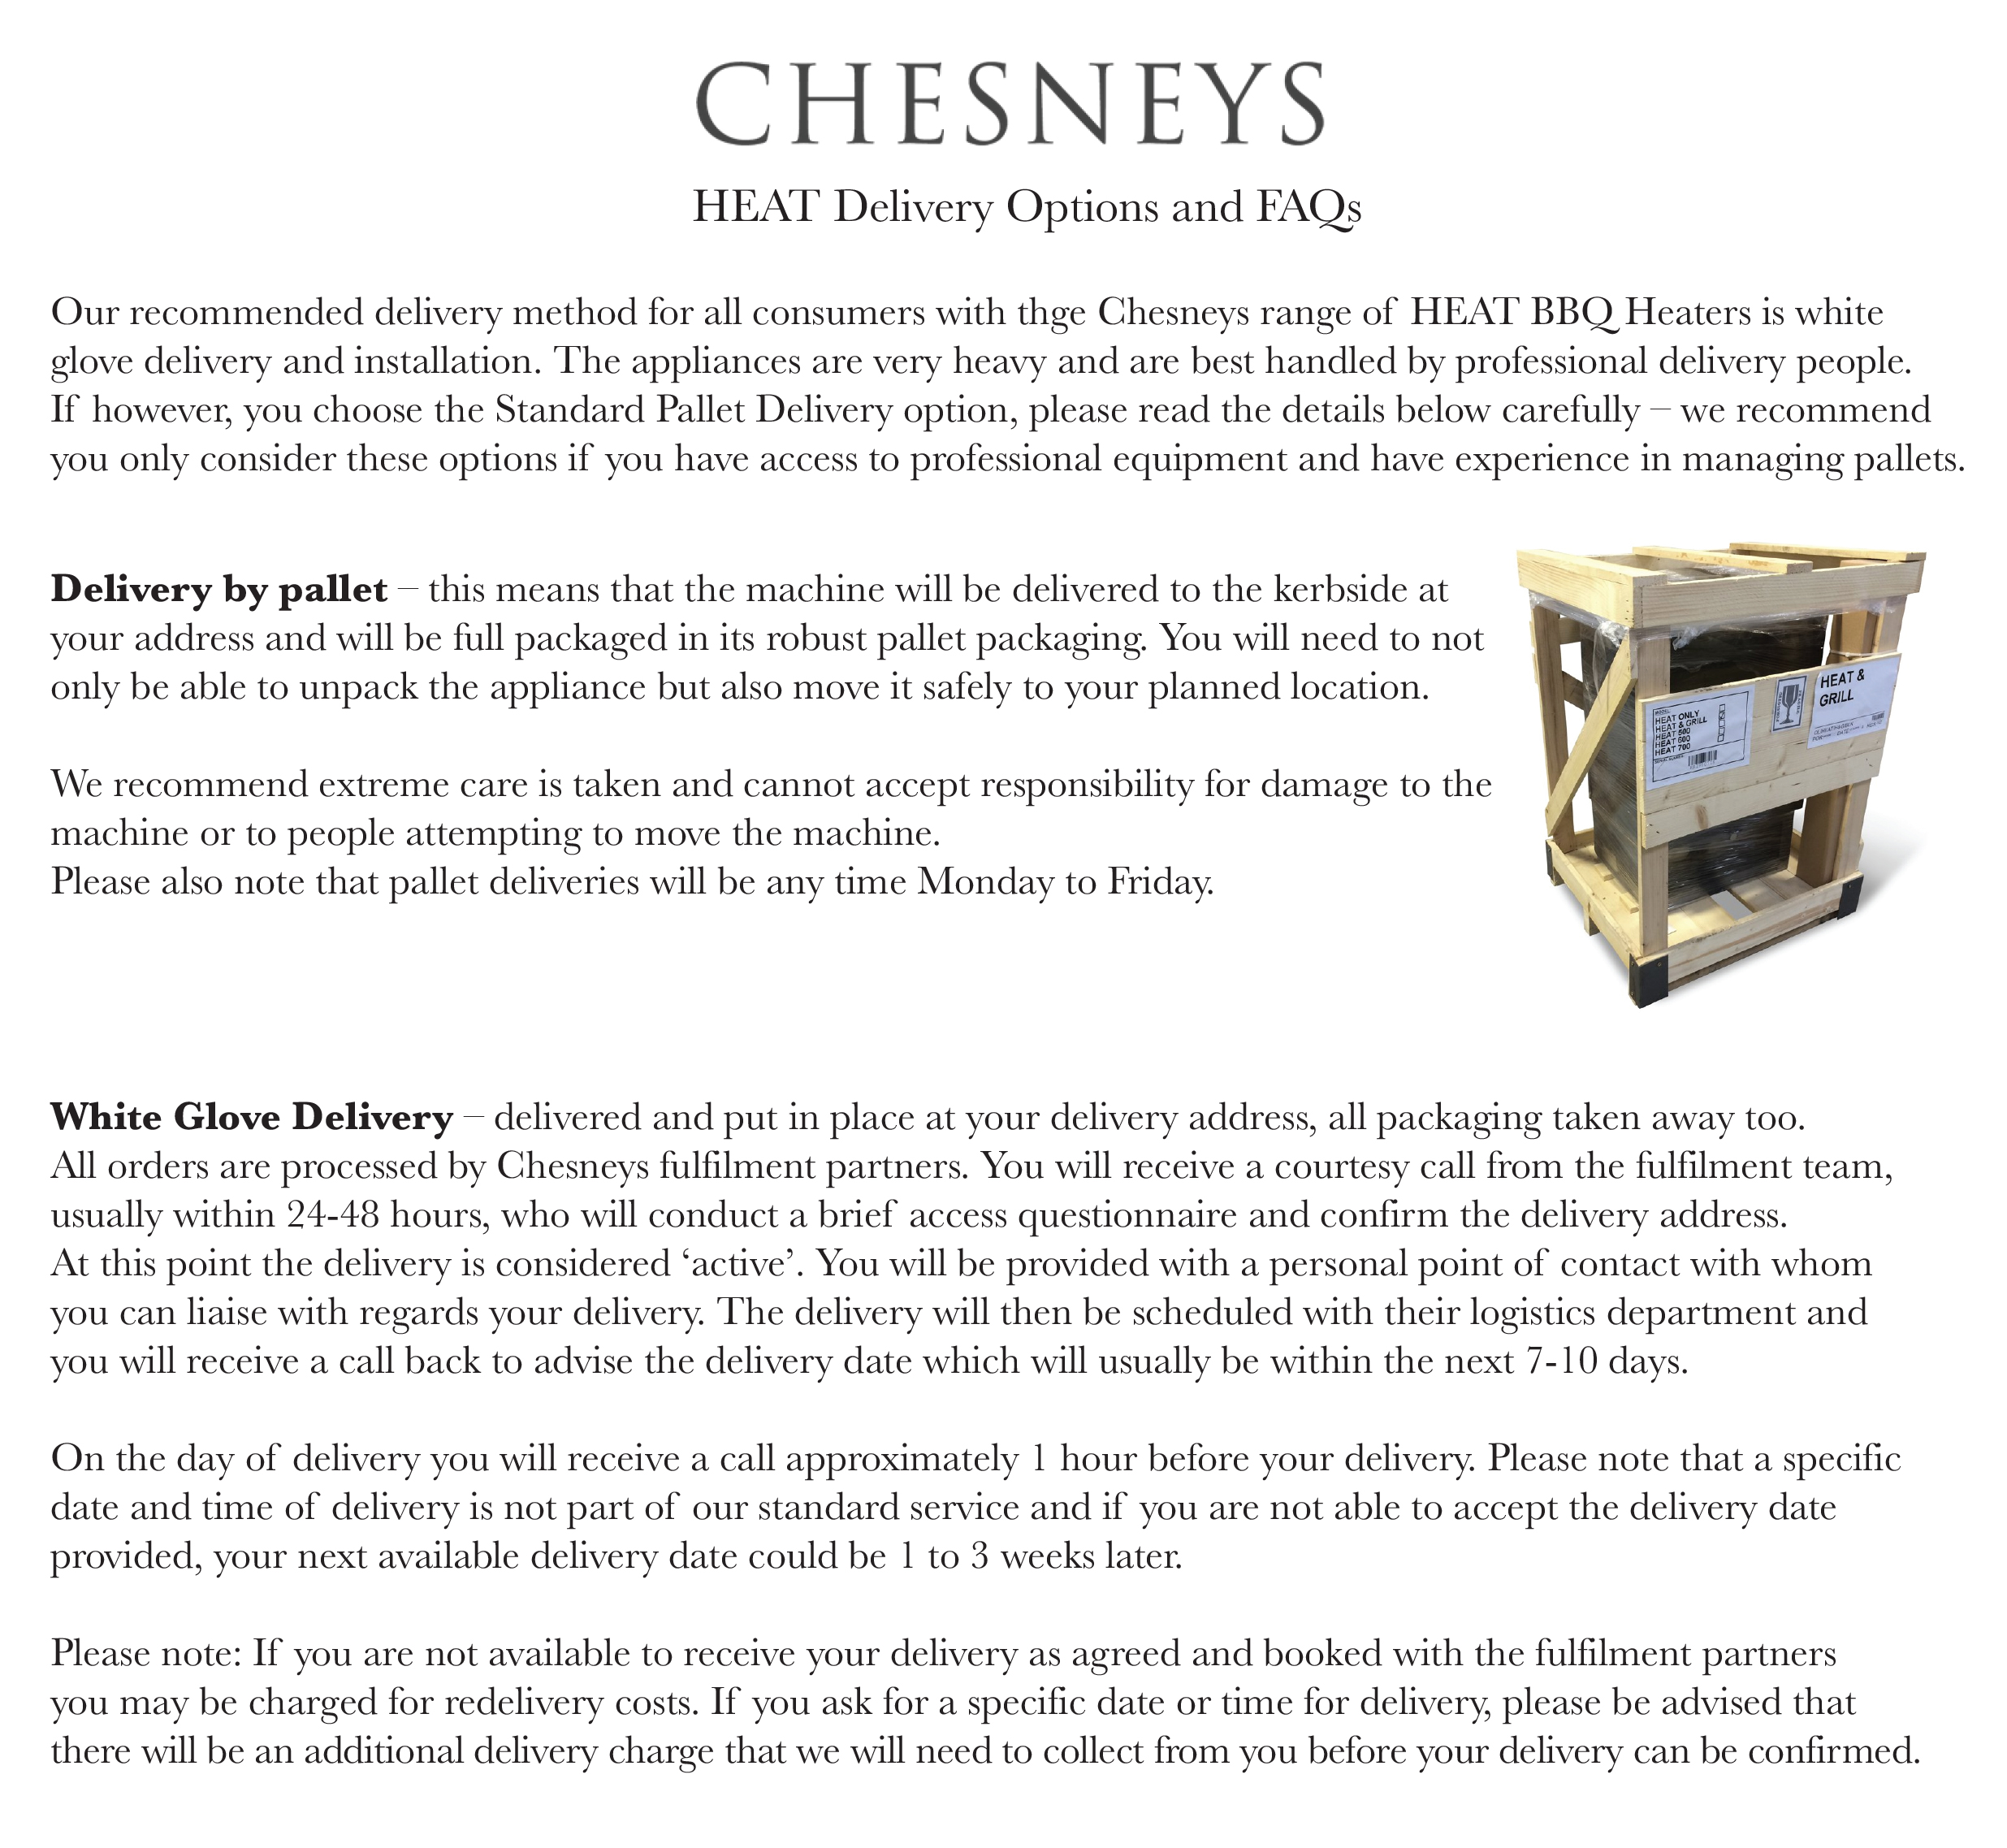 Chesneys HEAT Delivery Information